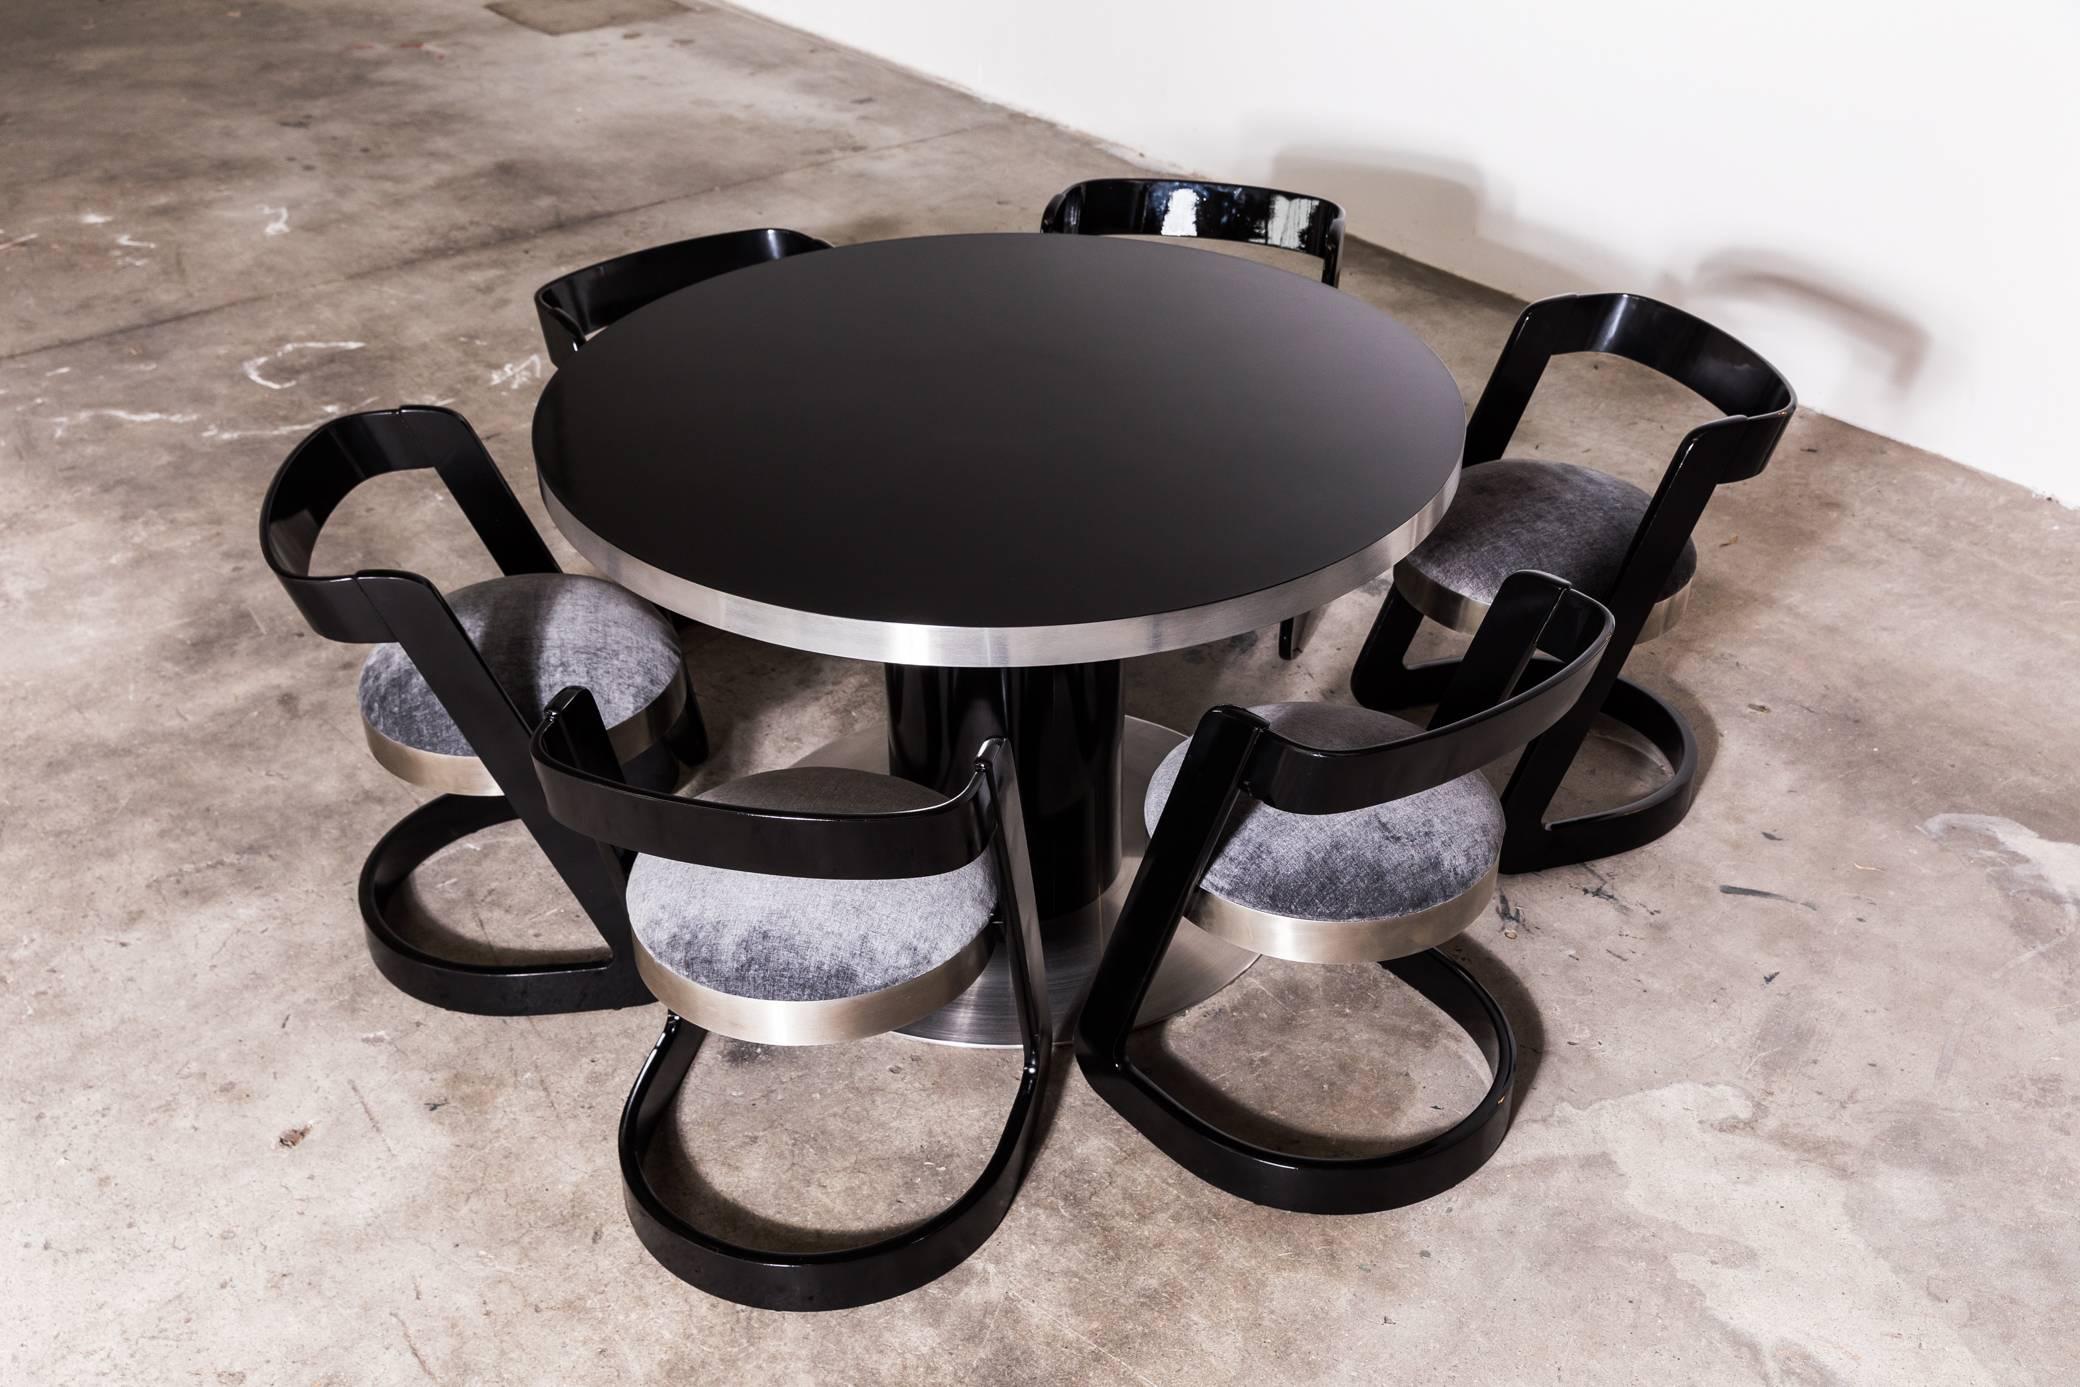 Set of dining table and six chairs by Willy Rizzo, circa 1970.
Table made of wood and steel: the surface has an elegant black gloss laminate surface framed by a steel band 5cm thick. The pedestal is laminated as the top and stands on a thick round